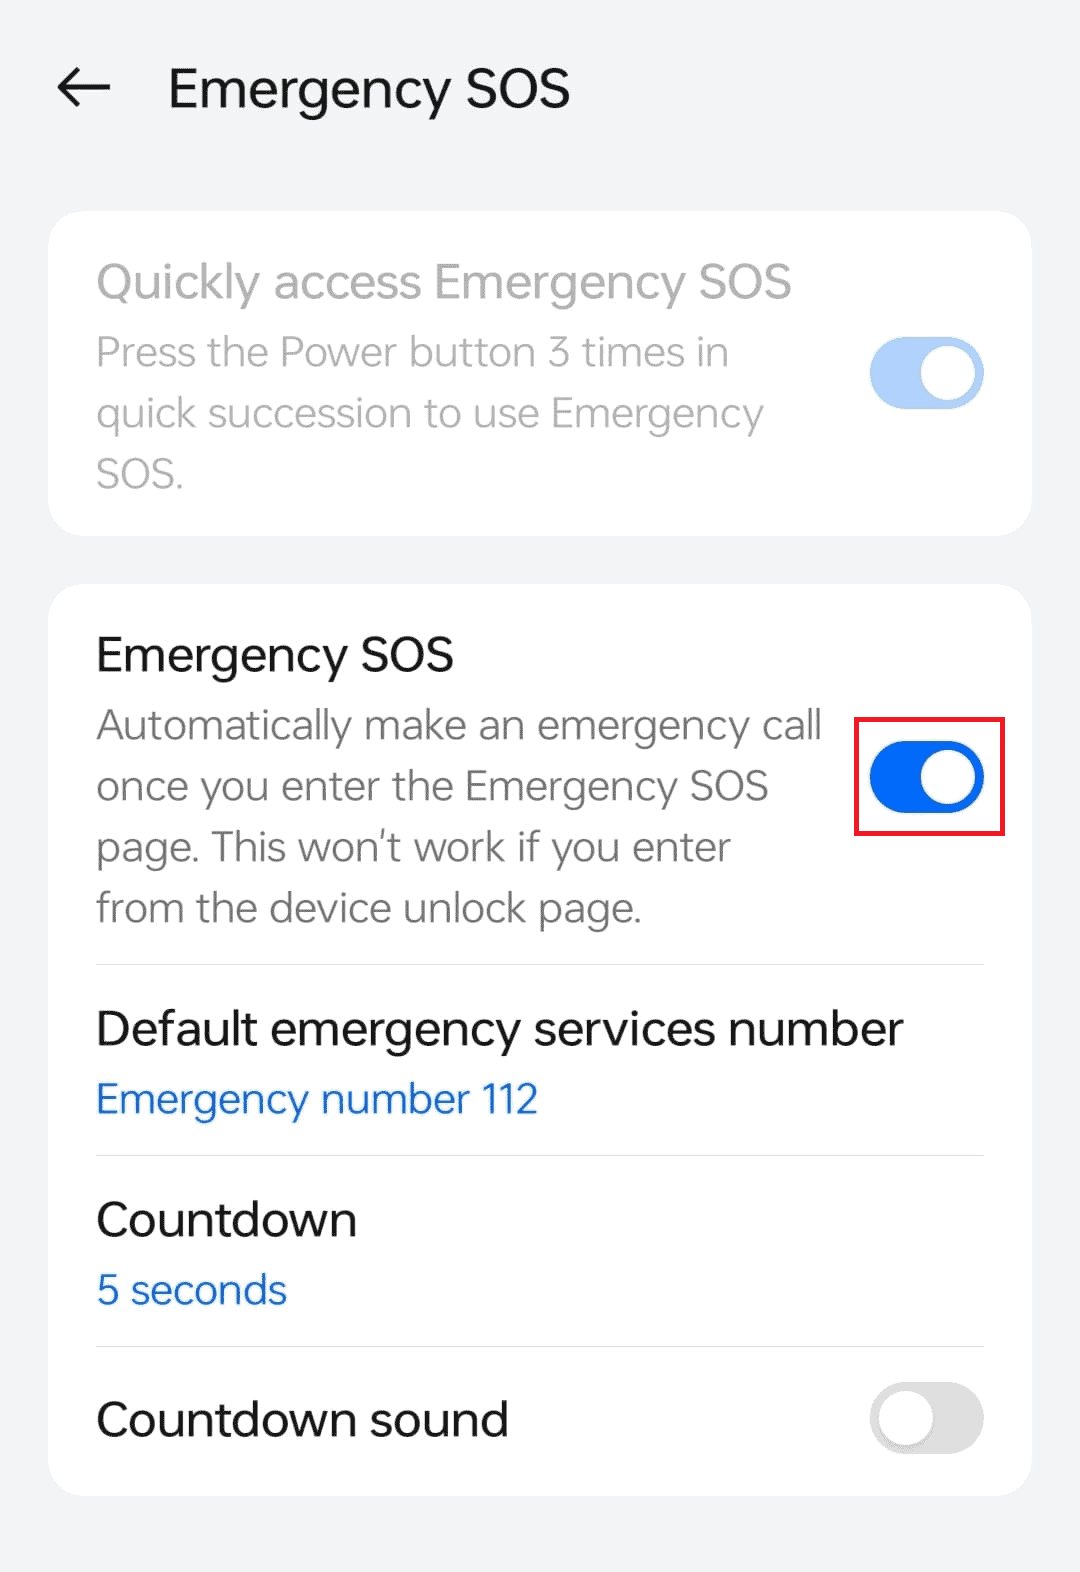 Toggle on the Emergency SOS switch